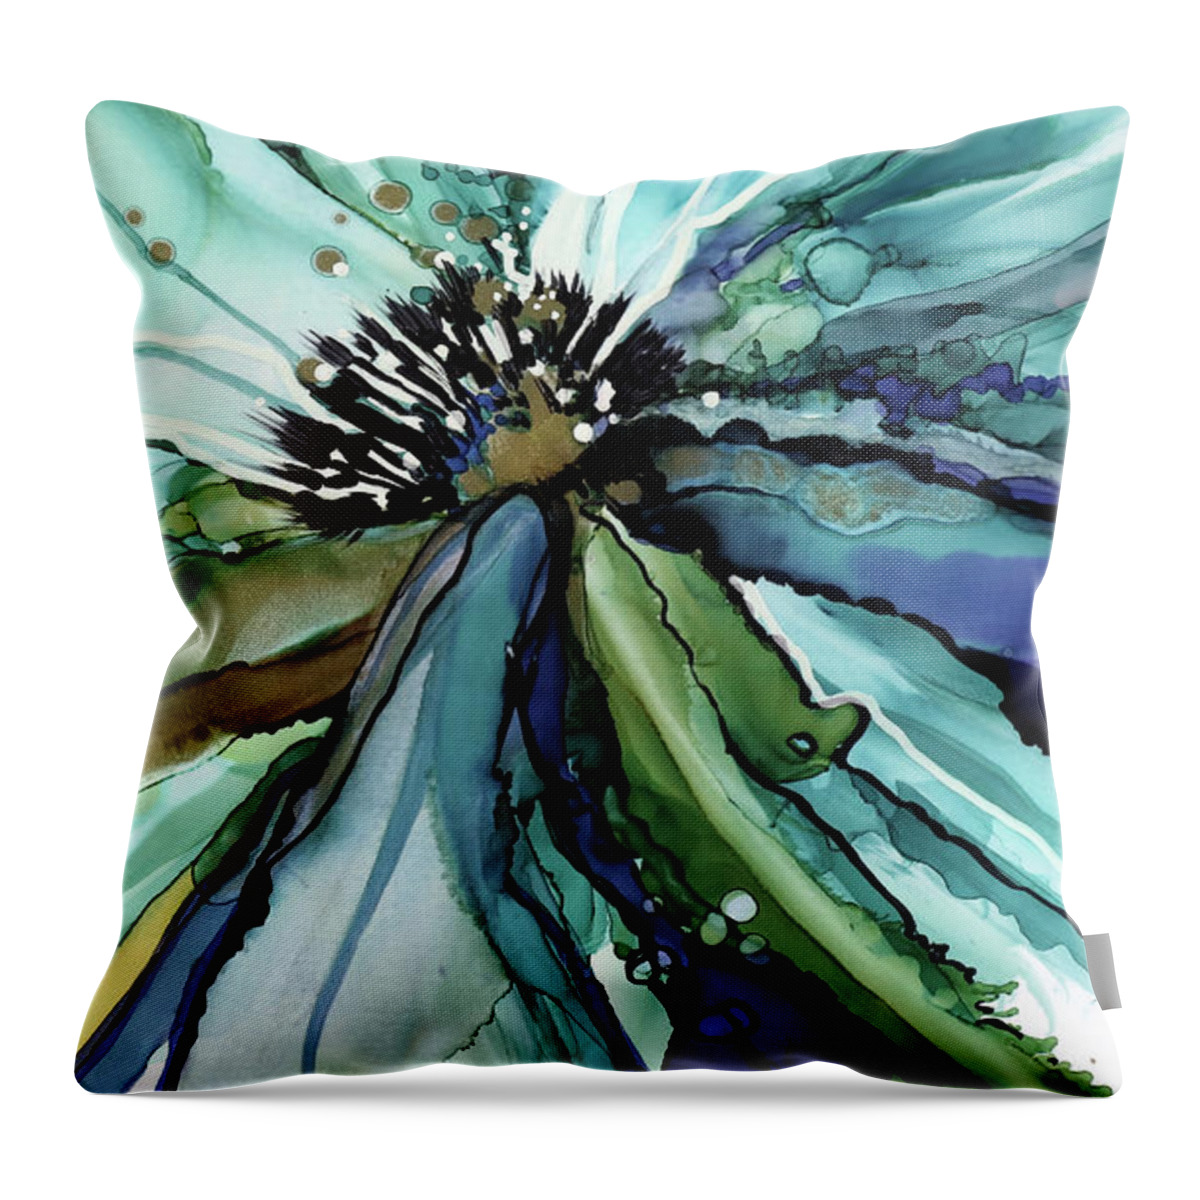  Throw Pillow featuring the painting Aqua Bloom by Julie Tibus